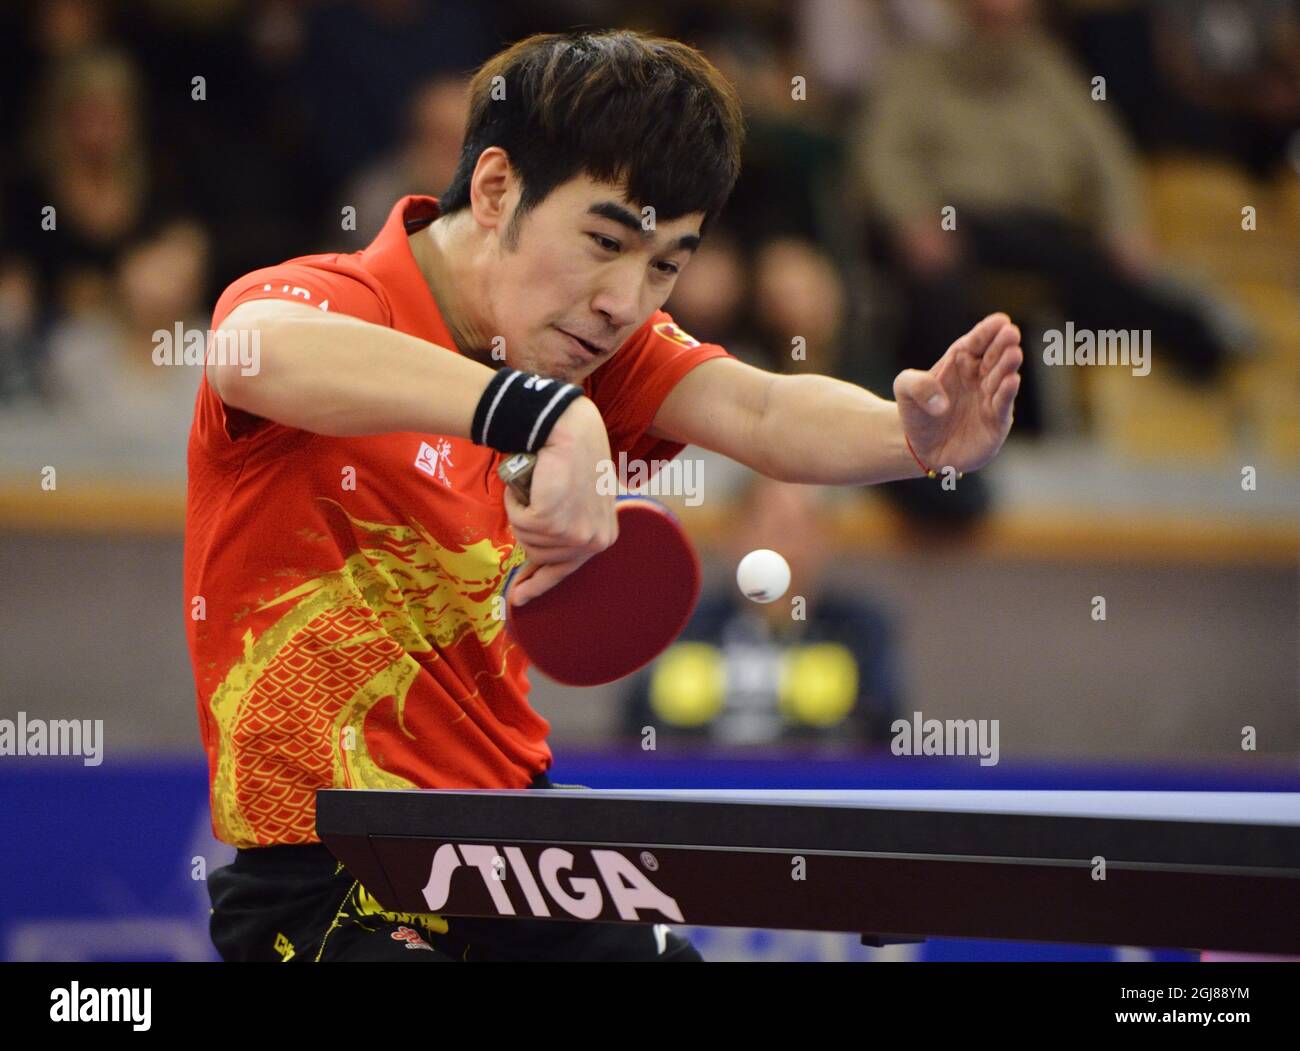 STOCKHOLM 2013-12-01 Yan An of China wins the table tennis final match  against compatriot Fan Zhendong during the Swedish Open Championships at  the Eriksdalshallen in Stockholm, Sweden, on Dec. 01, 2013. Photo: